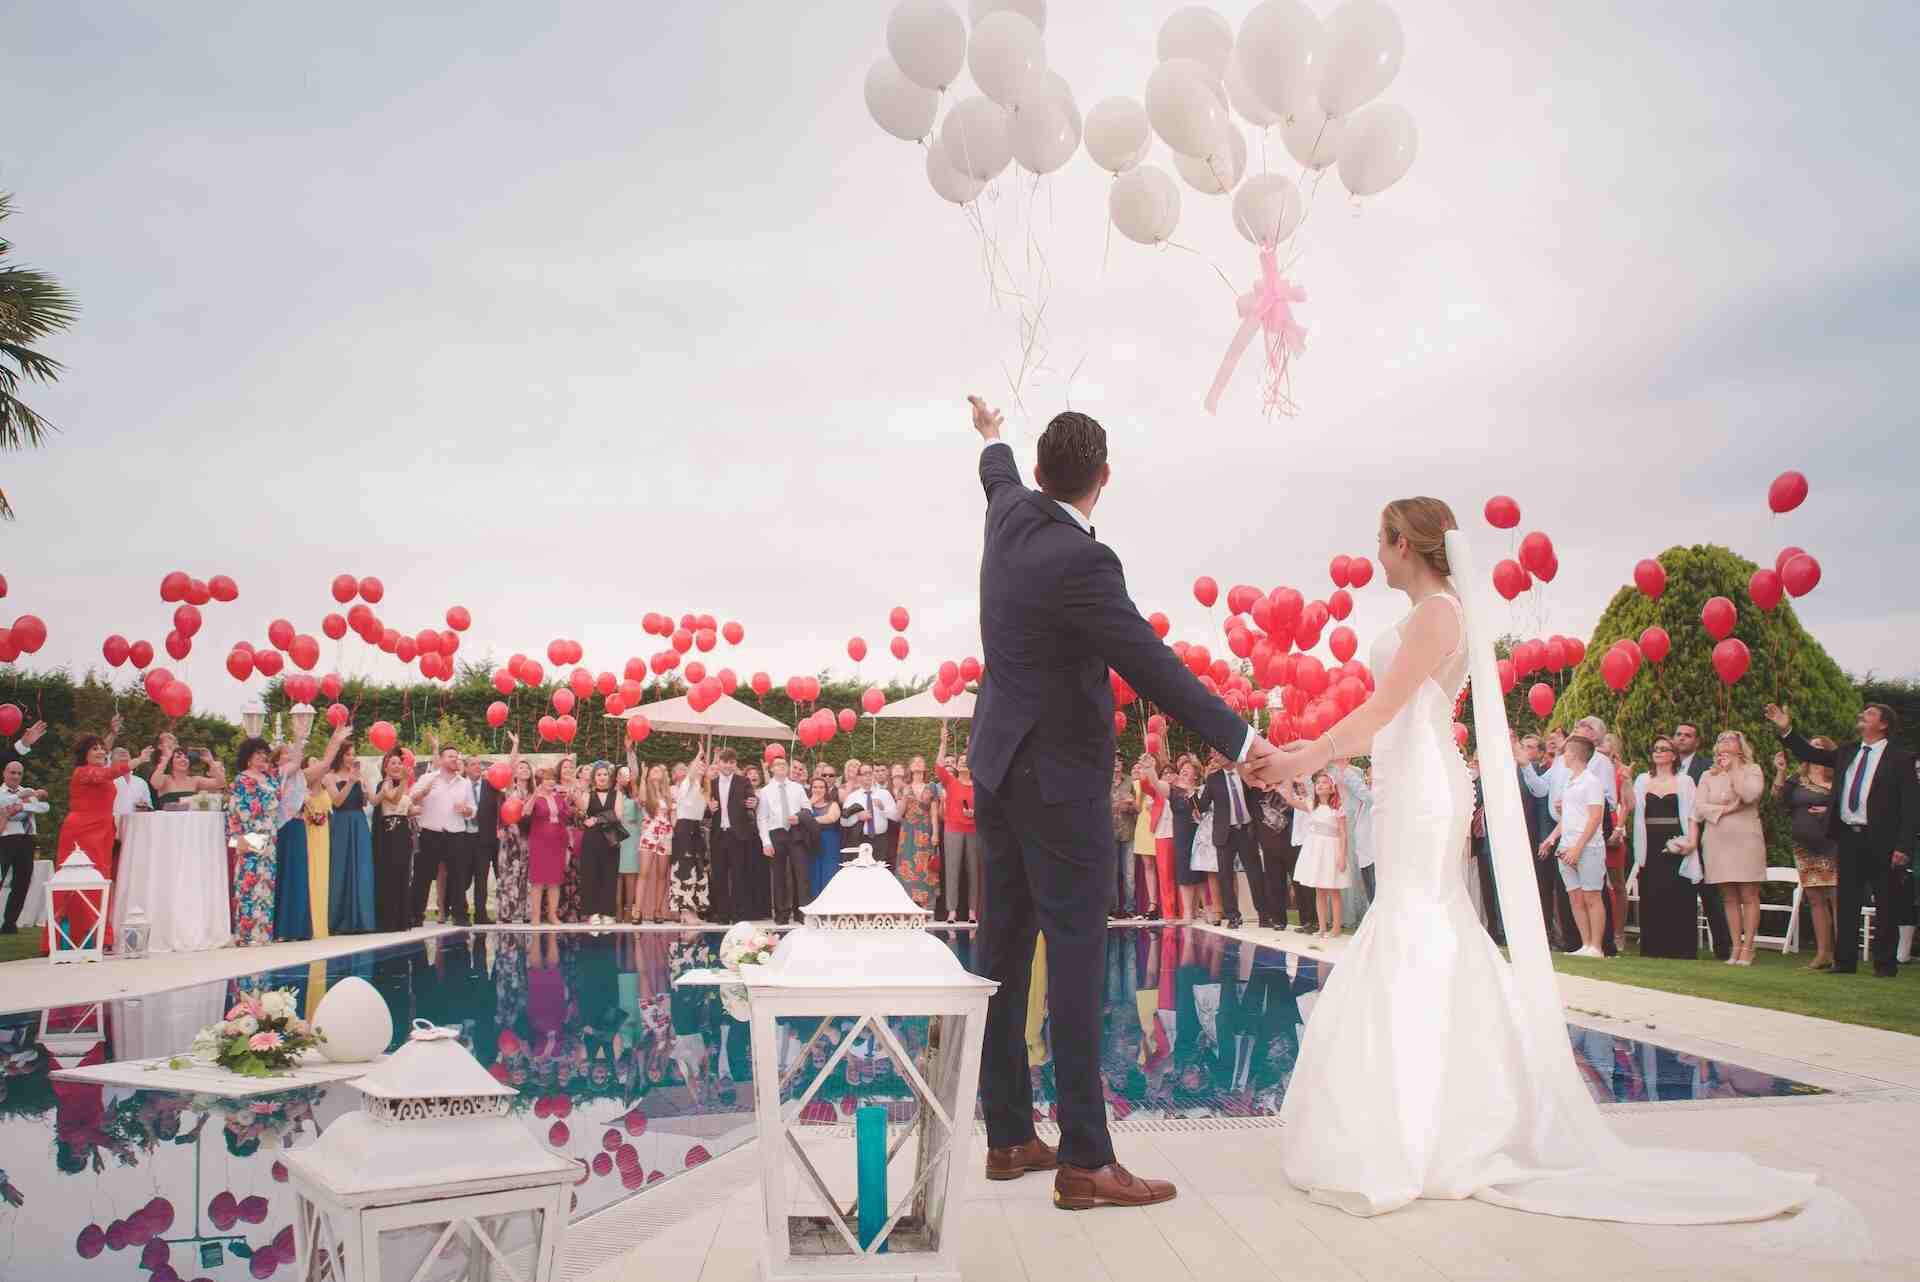 A couple releasing balloons at their poolside wedding